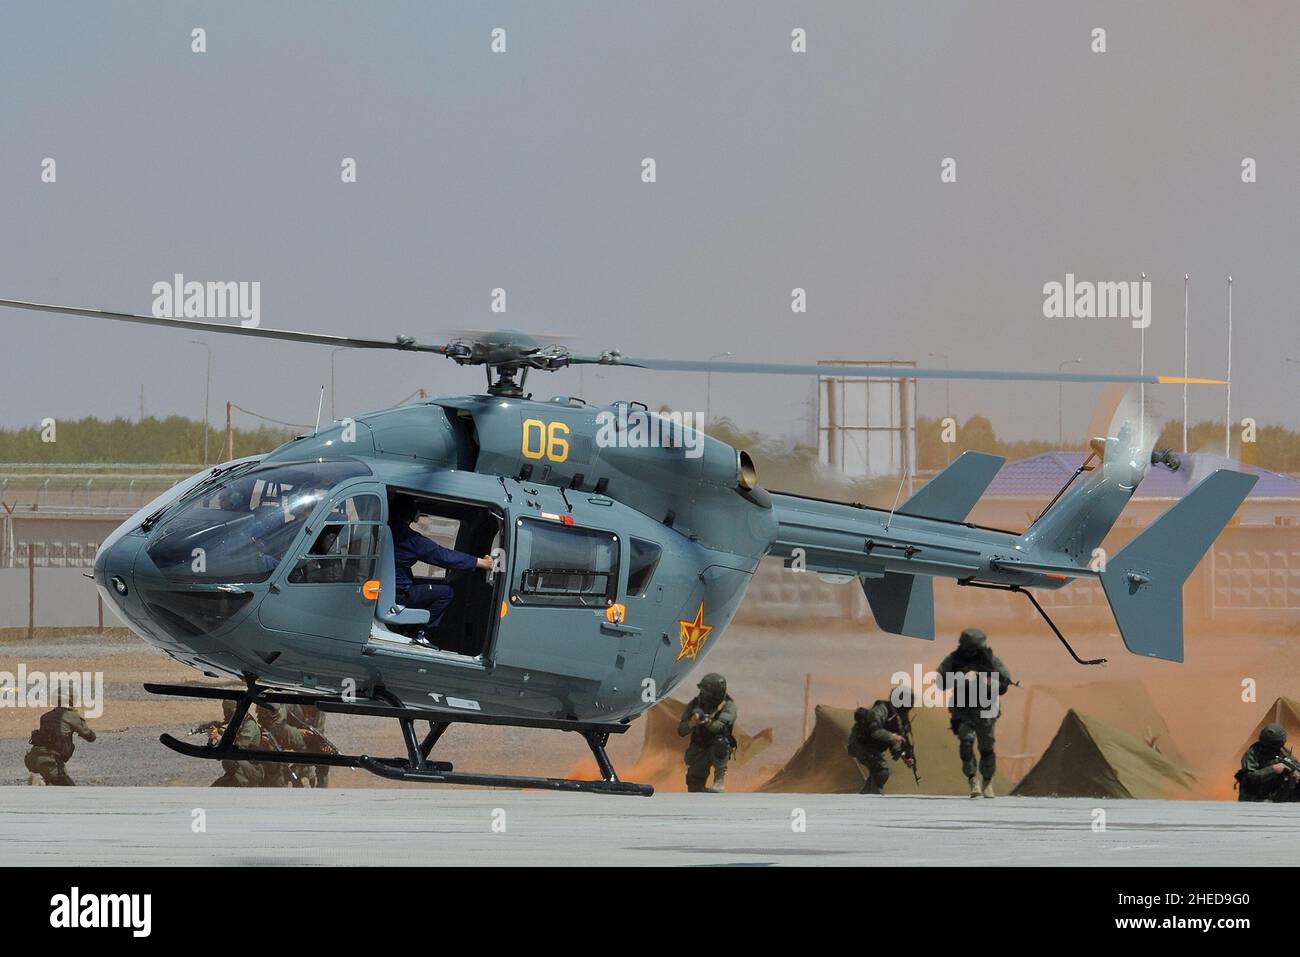 KAZAKHSTAN AIR FORCE EC145 HELICOPTER SUPPORTING GROUND TROOPS. Stock Photo